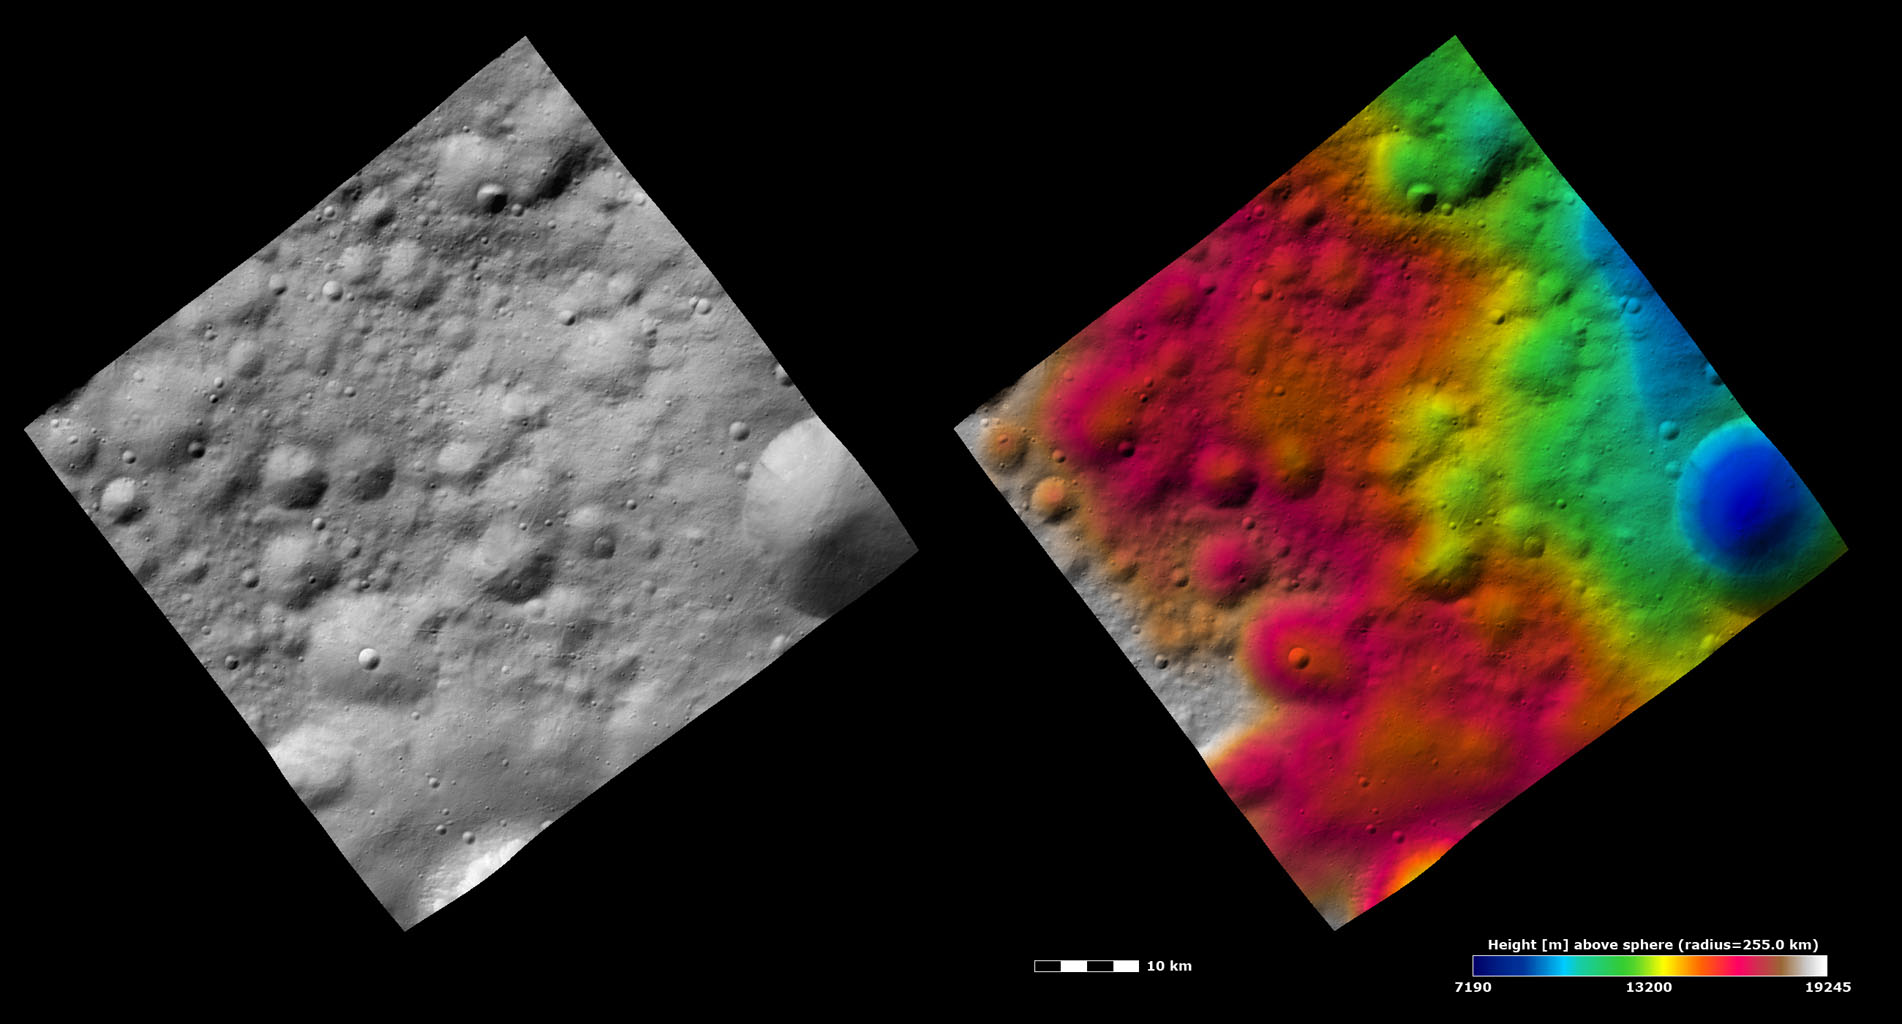 Topography and Albedo Image of Different Preservations States of Craters